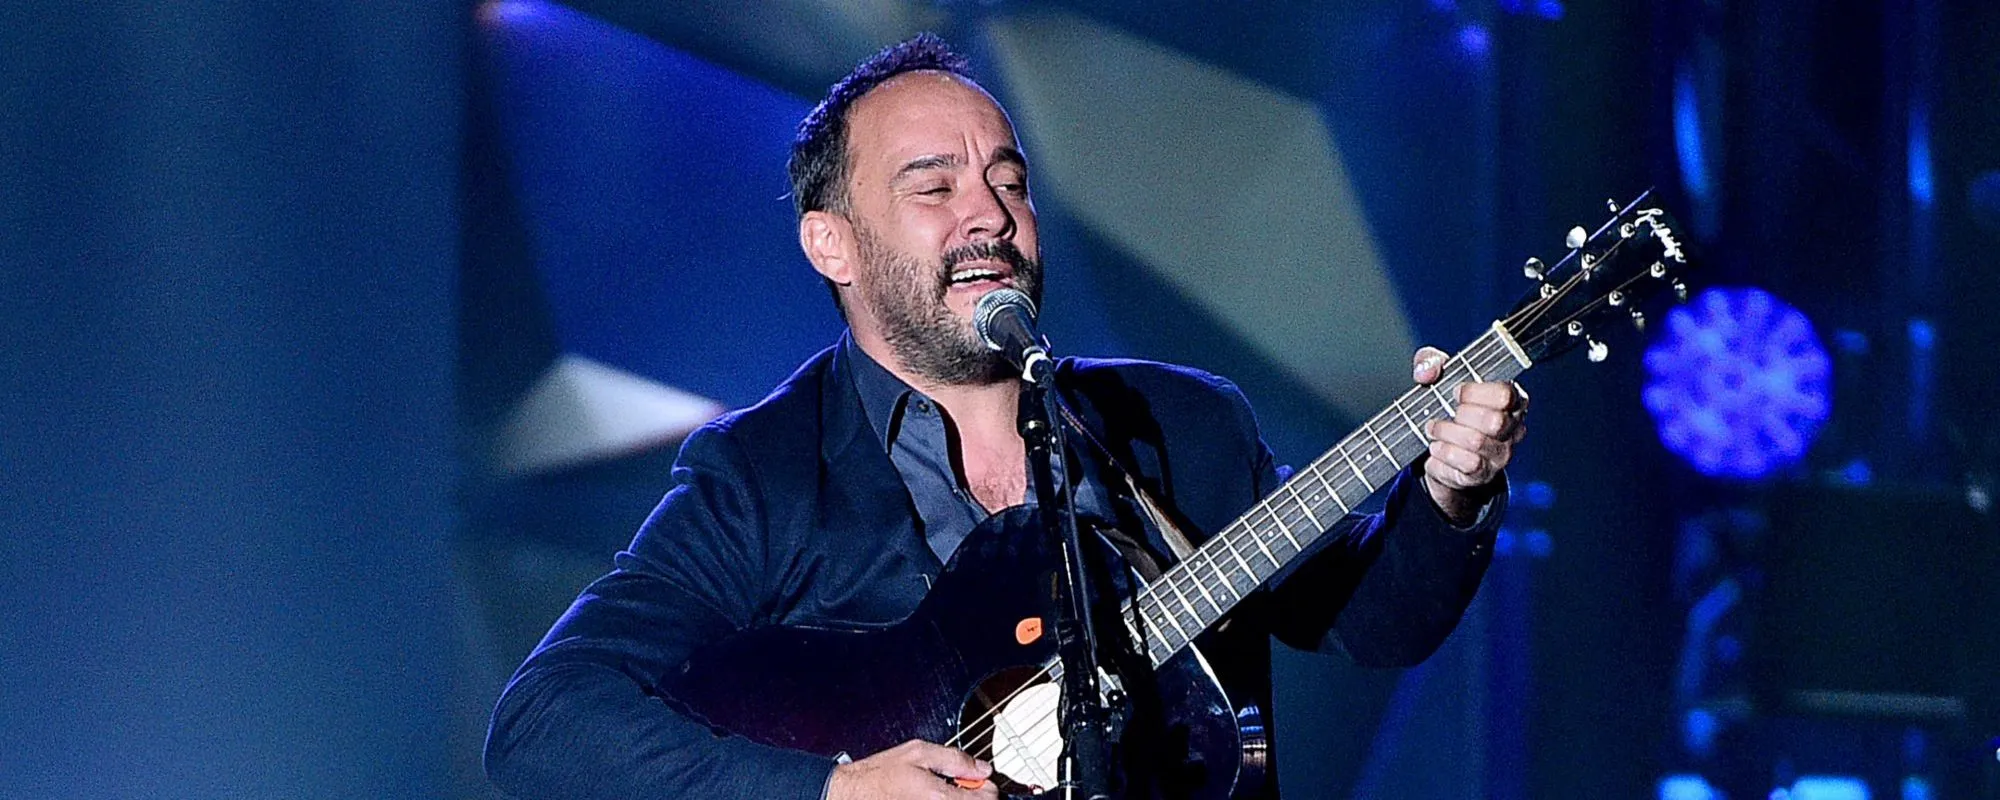 Dave Matthews Band Announce ‘Before These Crowded Streets’ Vinyl Reissue